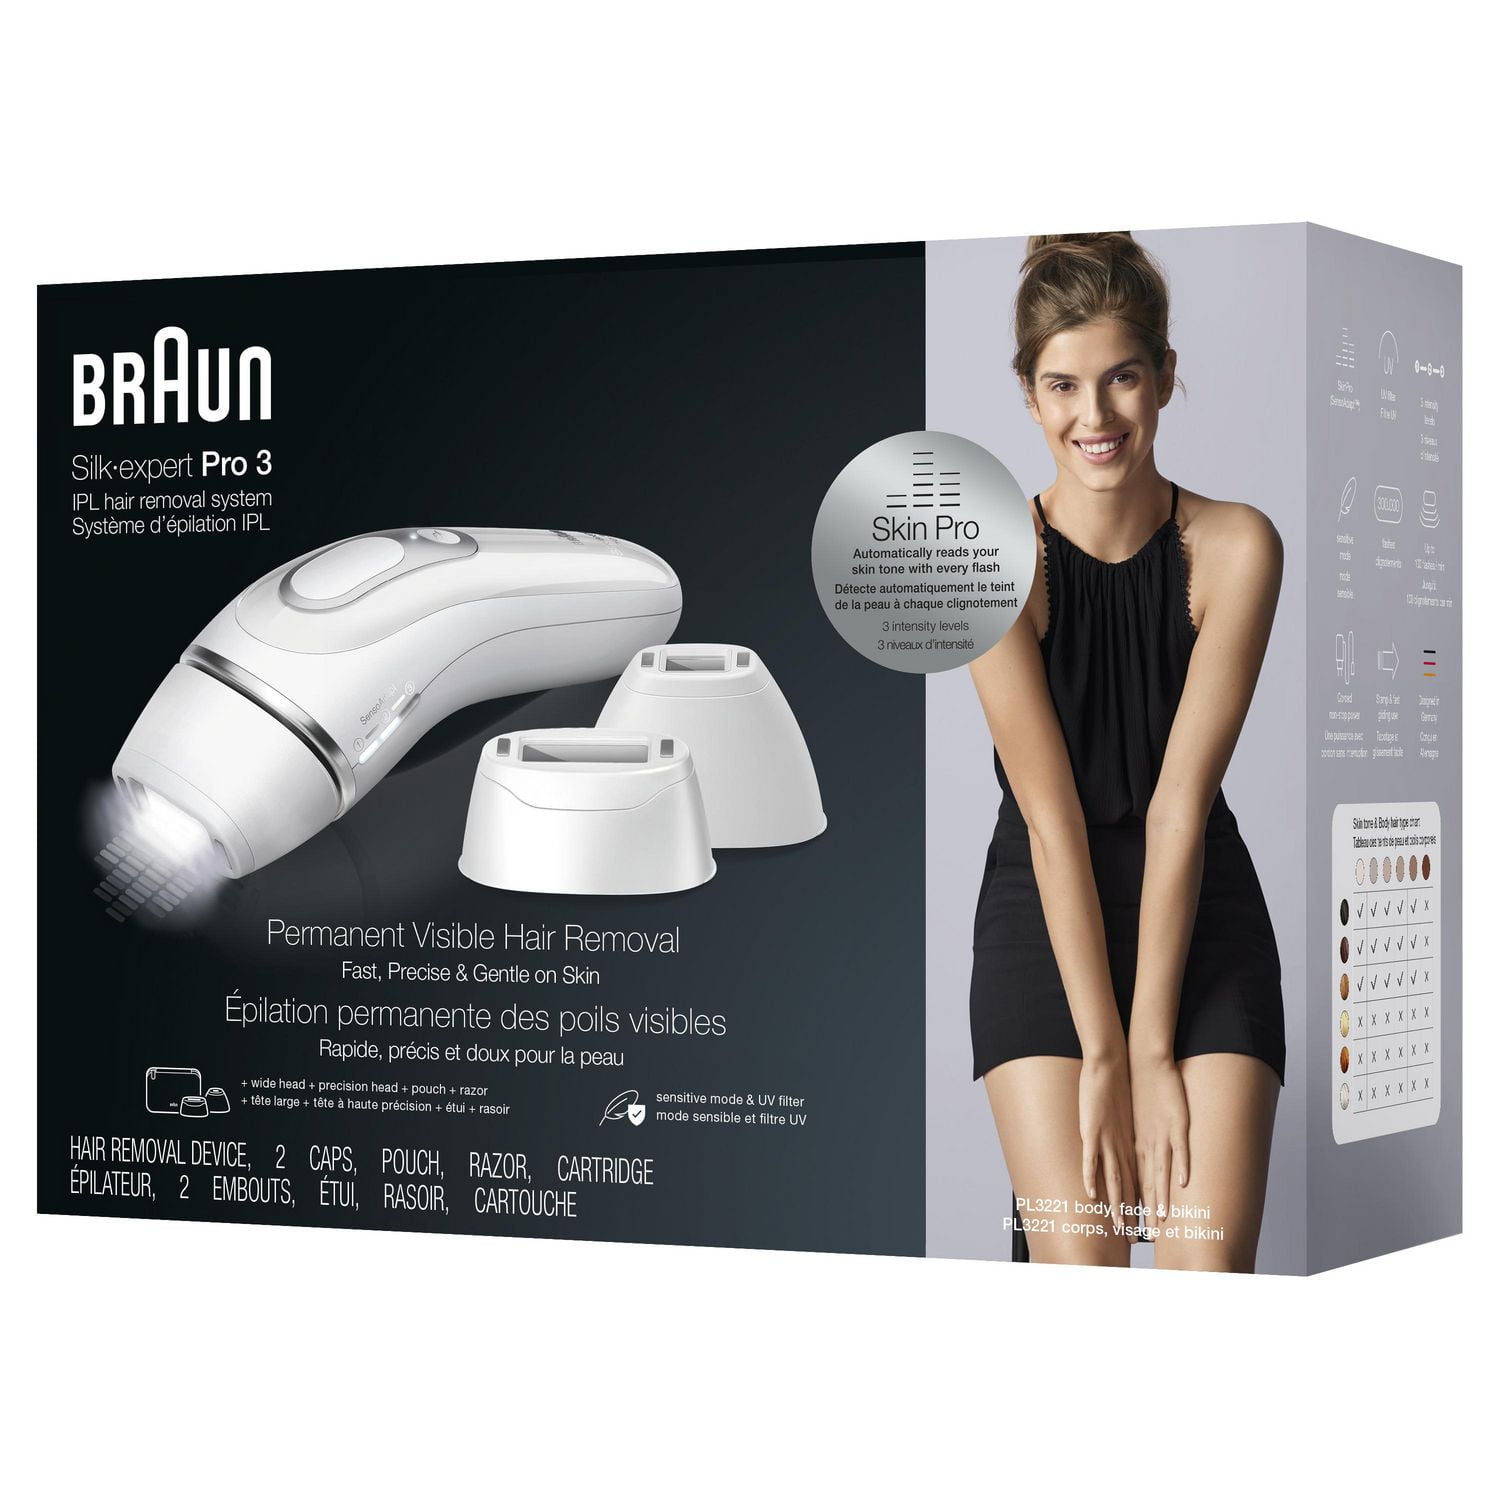 Braun Silk-Expert Pro 5 - REVIEW & RESULTS after 2 years in 2022